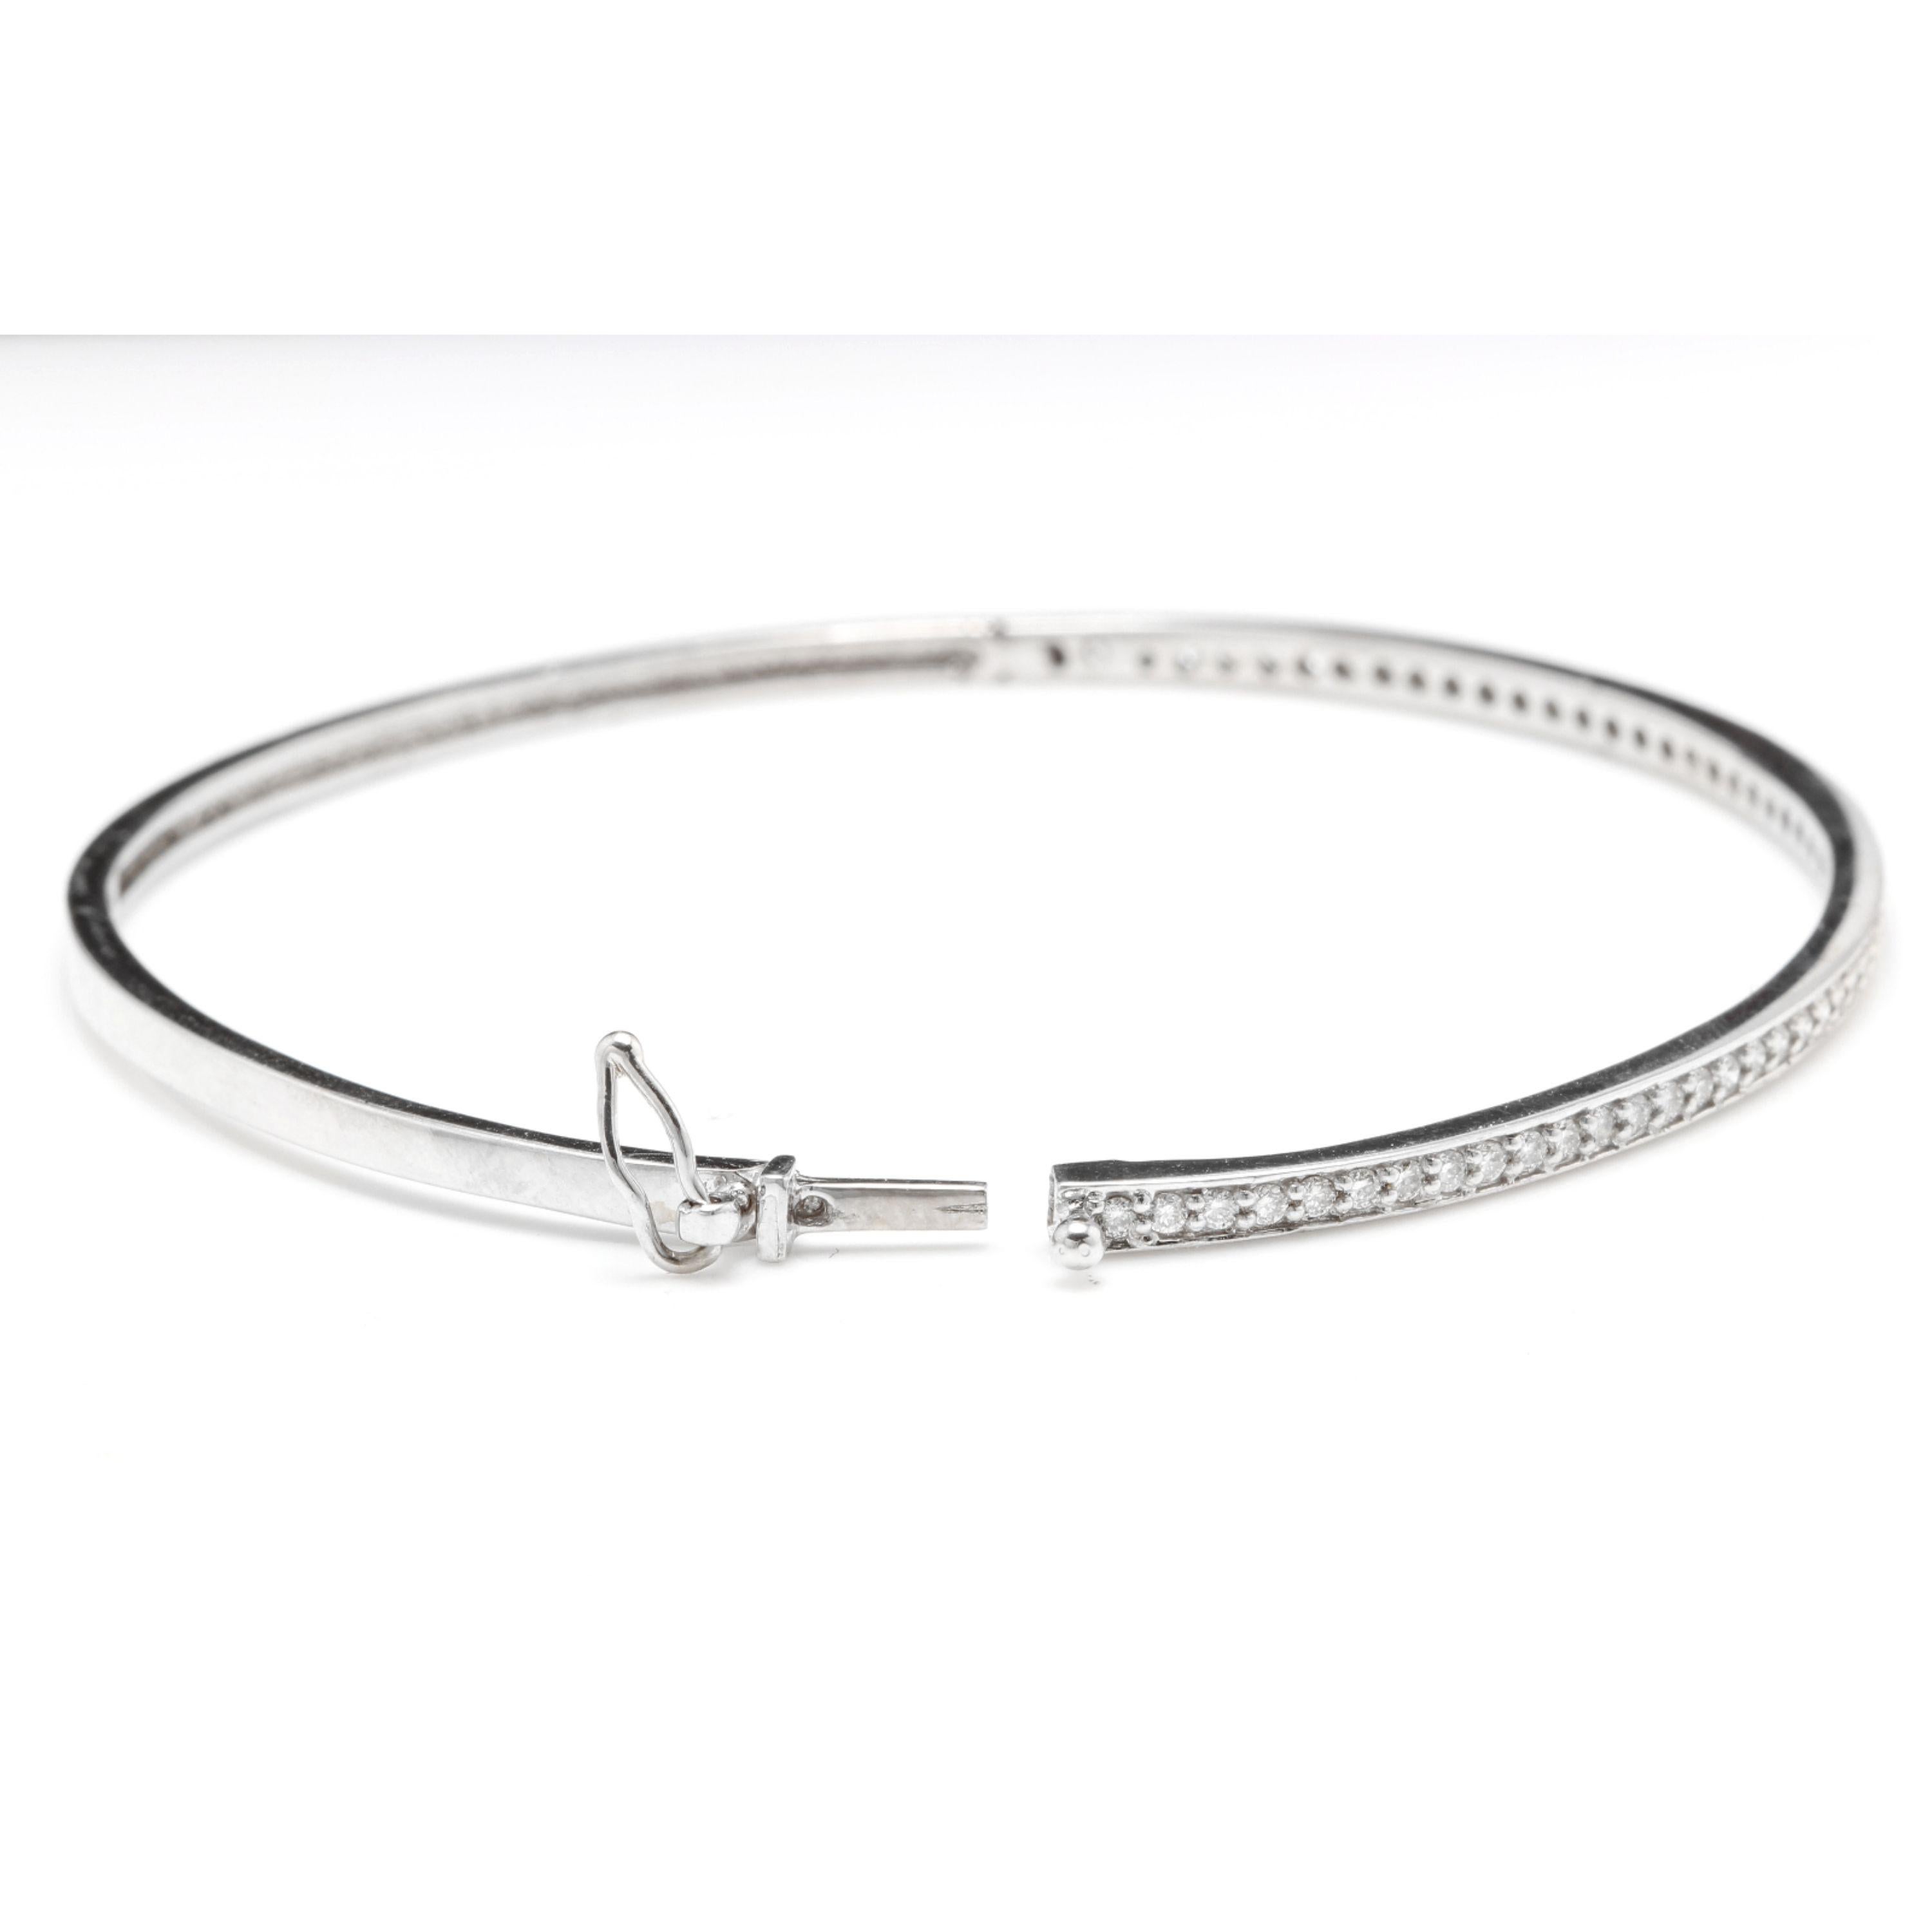 Very Impressive 0.75 Carats Natural Diamond 14K Solid White Gold Bangle Bracelet

STAMPED: 14K

Total Natural Round Diamonds Weight: Approx. 0.75 Carats (color G-H / Clarity SI1-SI2)

Bangle Wrist Size is: 7 inches

Width: 2.42mm

Bracelet total